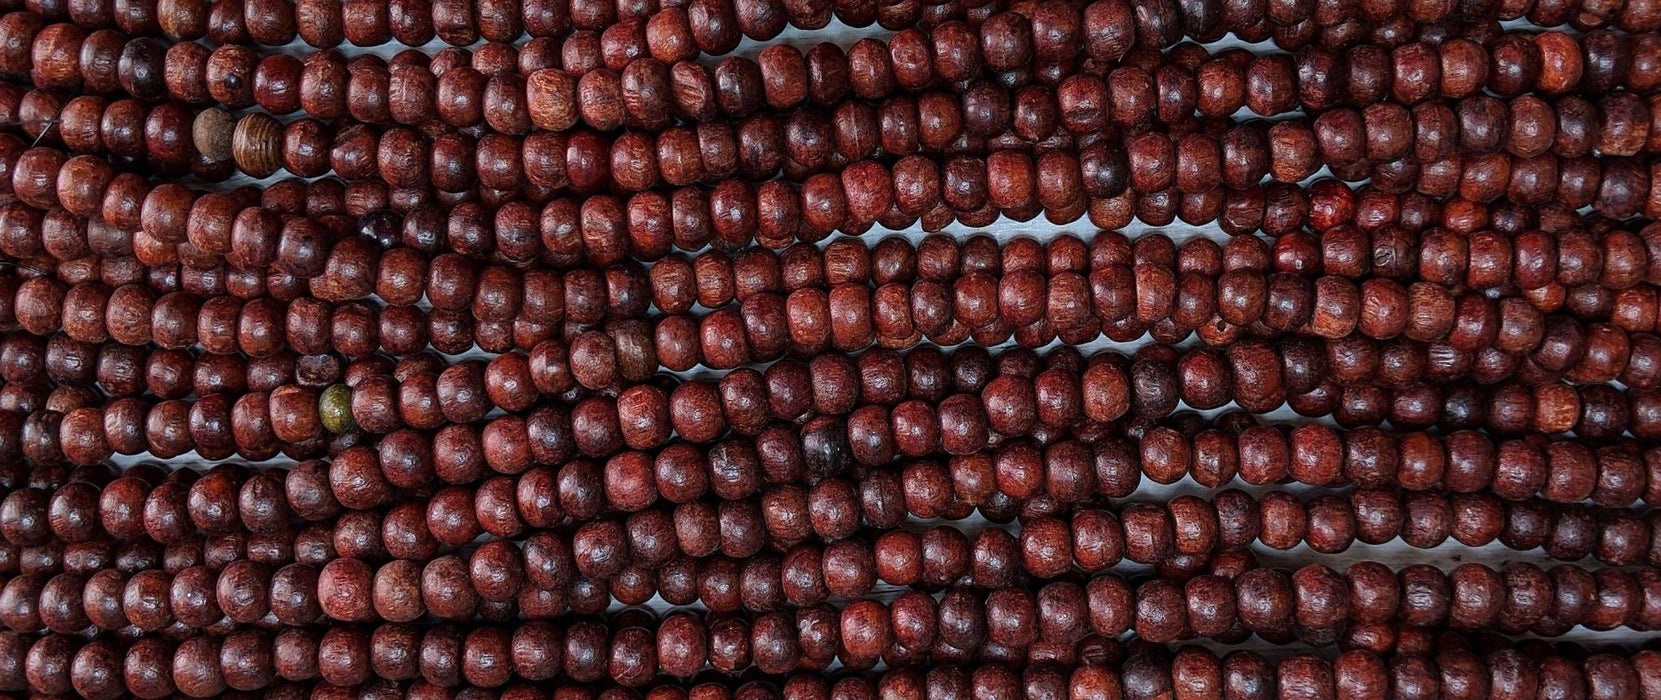 10mm Mahogany Red Round Wood Beads - 16 Inch Strand (AW19) - Beads and Babble